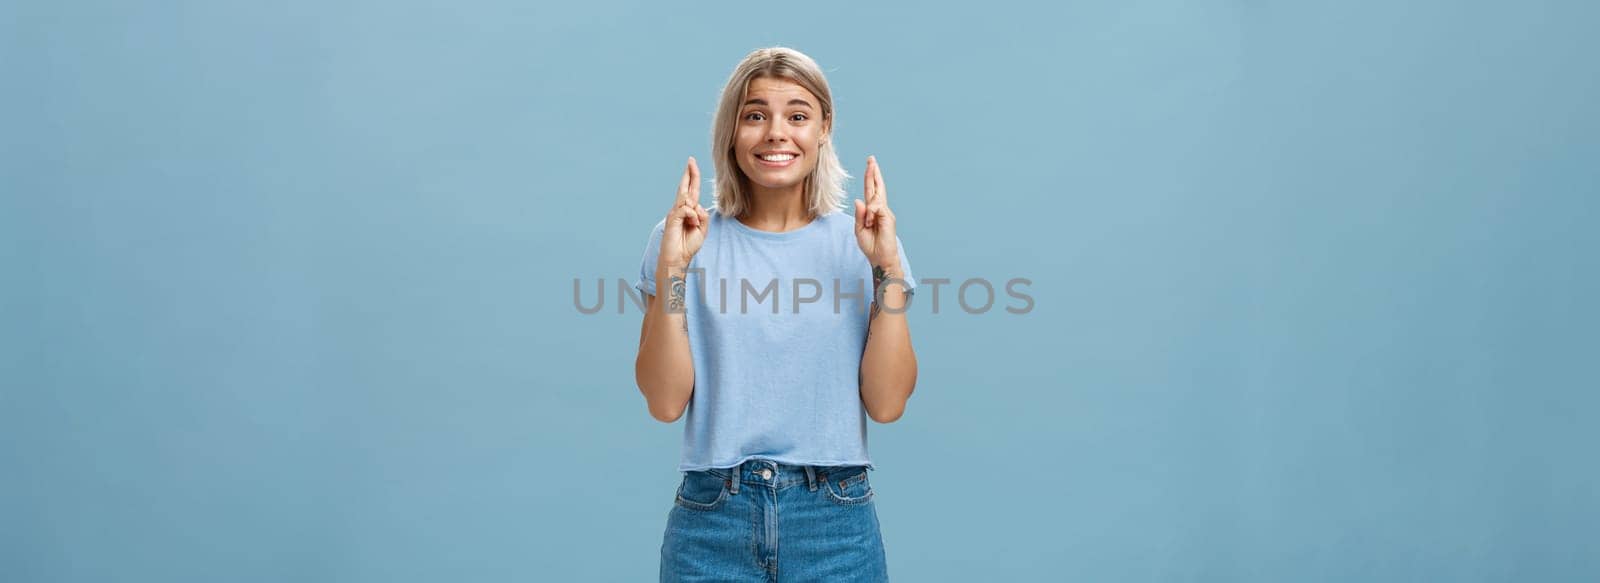 Hope dream come true soon. Portrait of emotive happy and optimistic attractive young european woman with blond hair and tanned skin crossing fingers for good luck and smiling over blue wall.